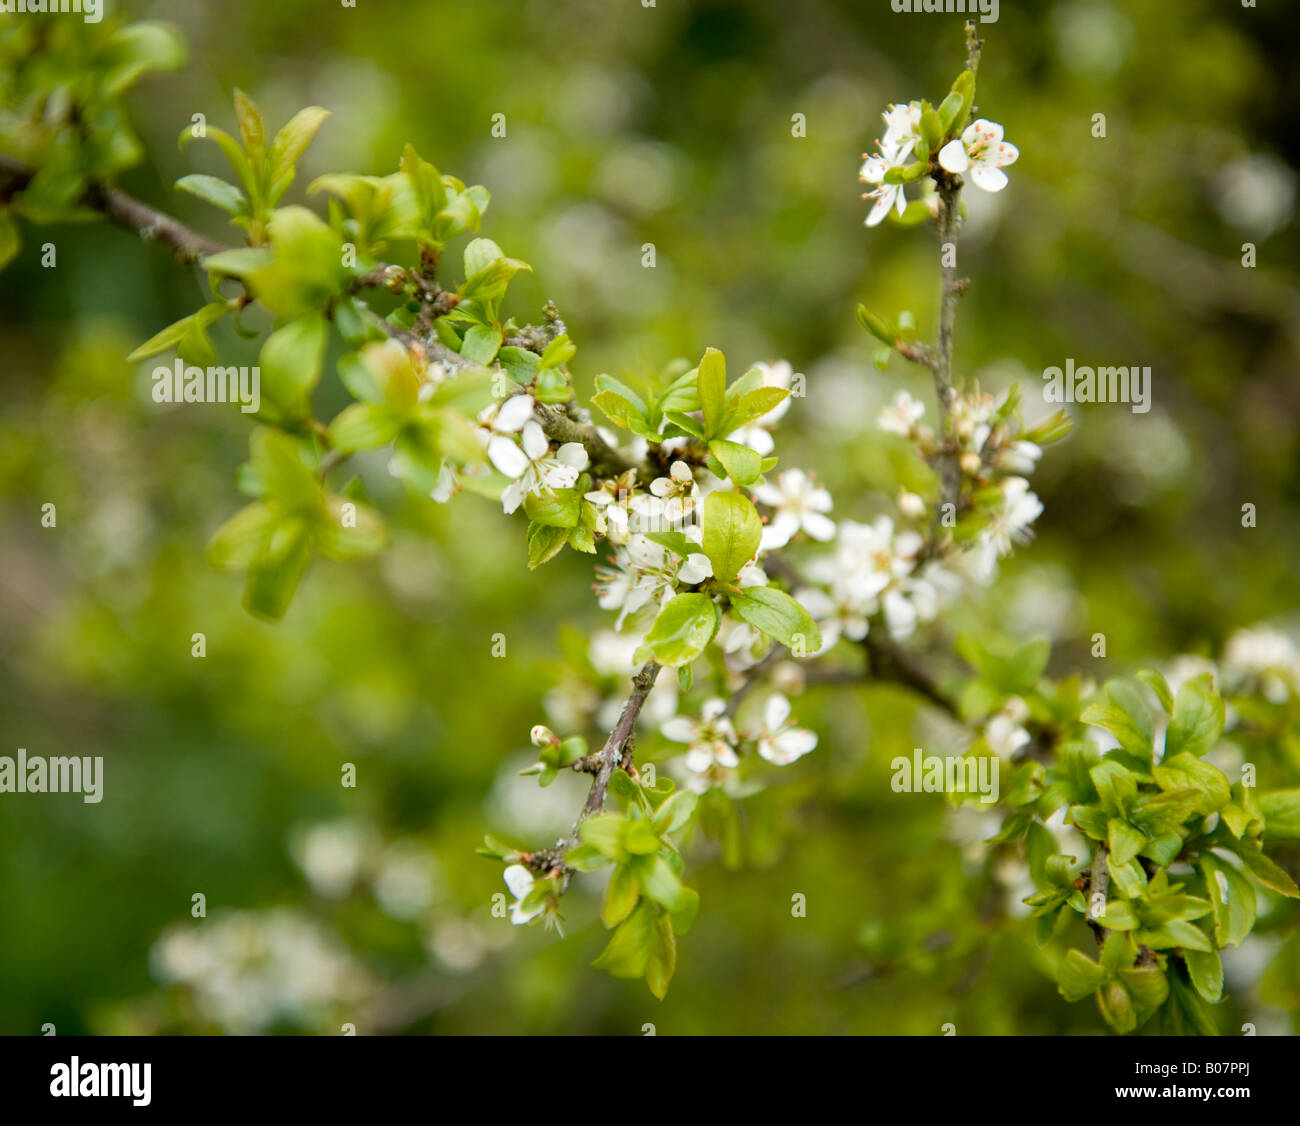 Blackthorn branch in leaf and flower Stock Photo